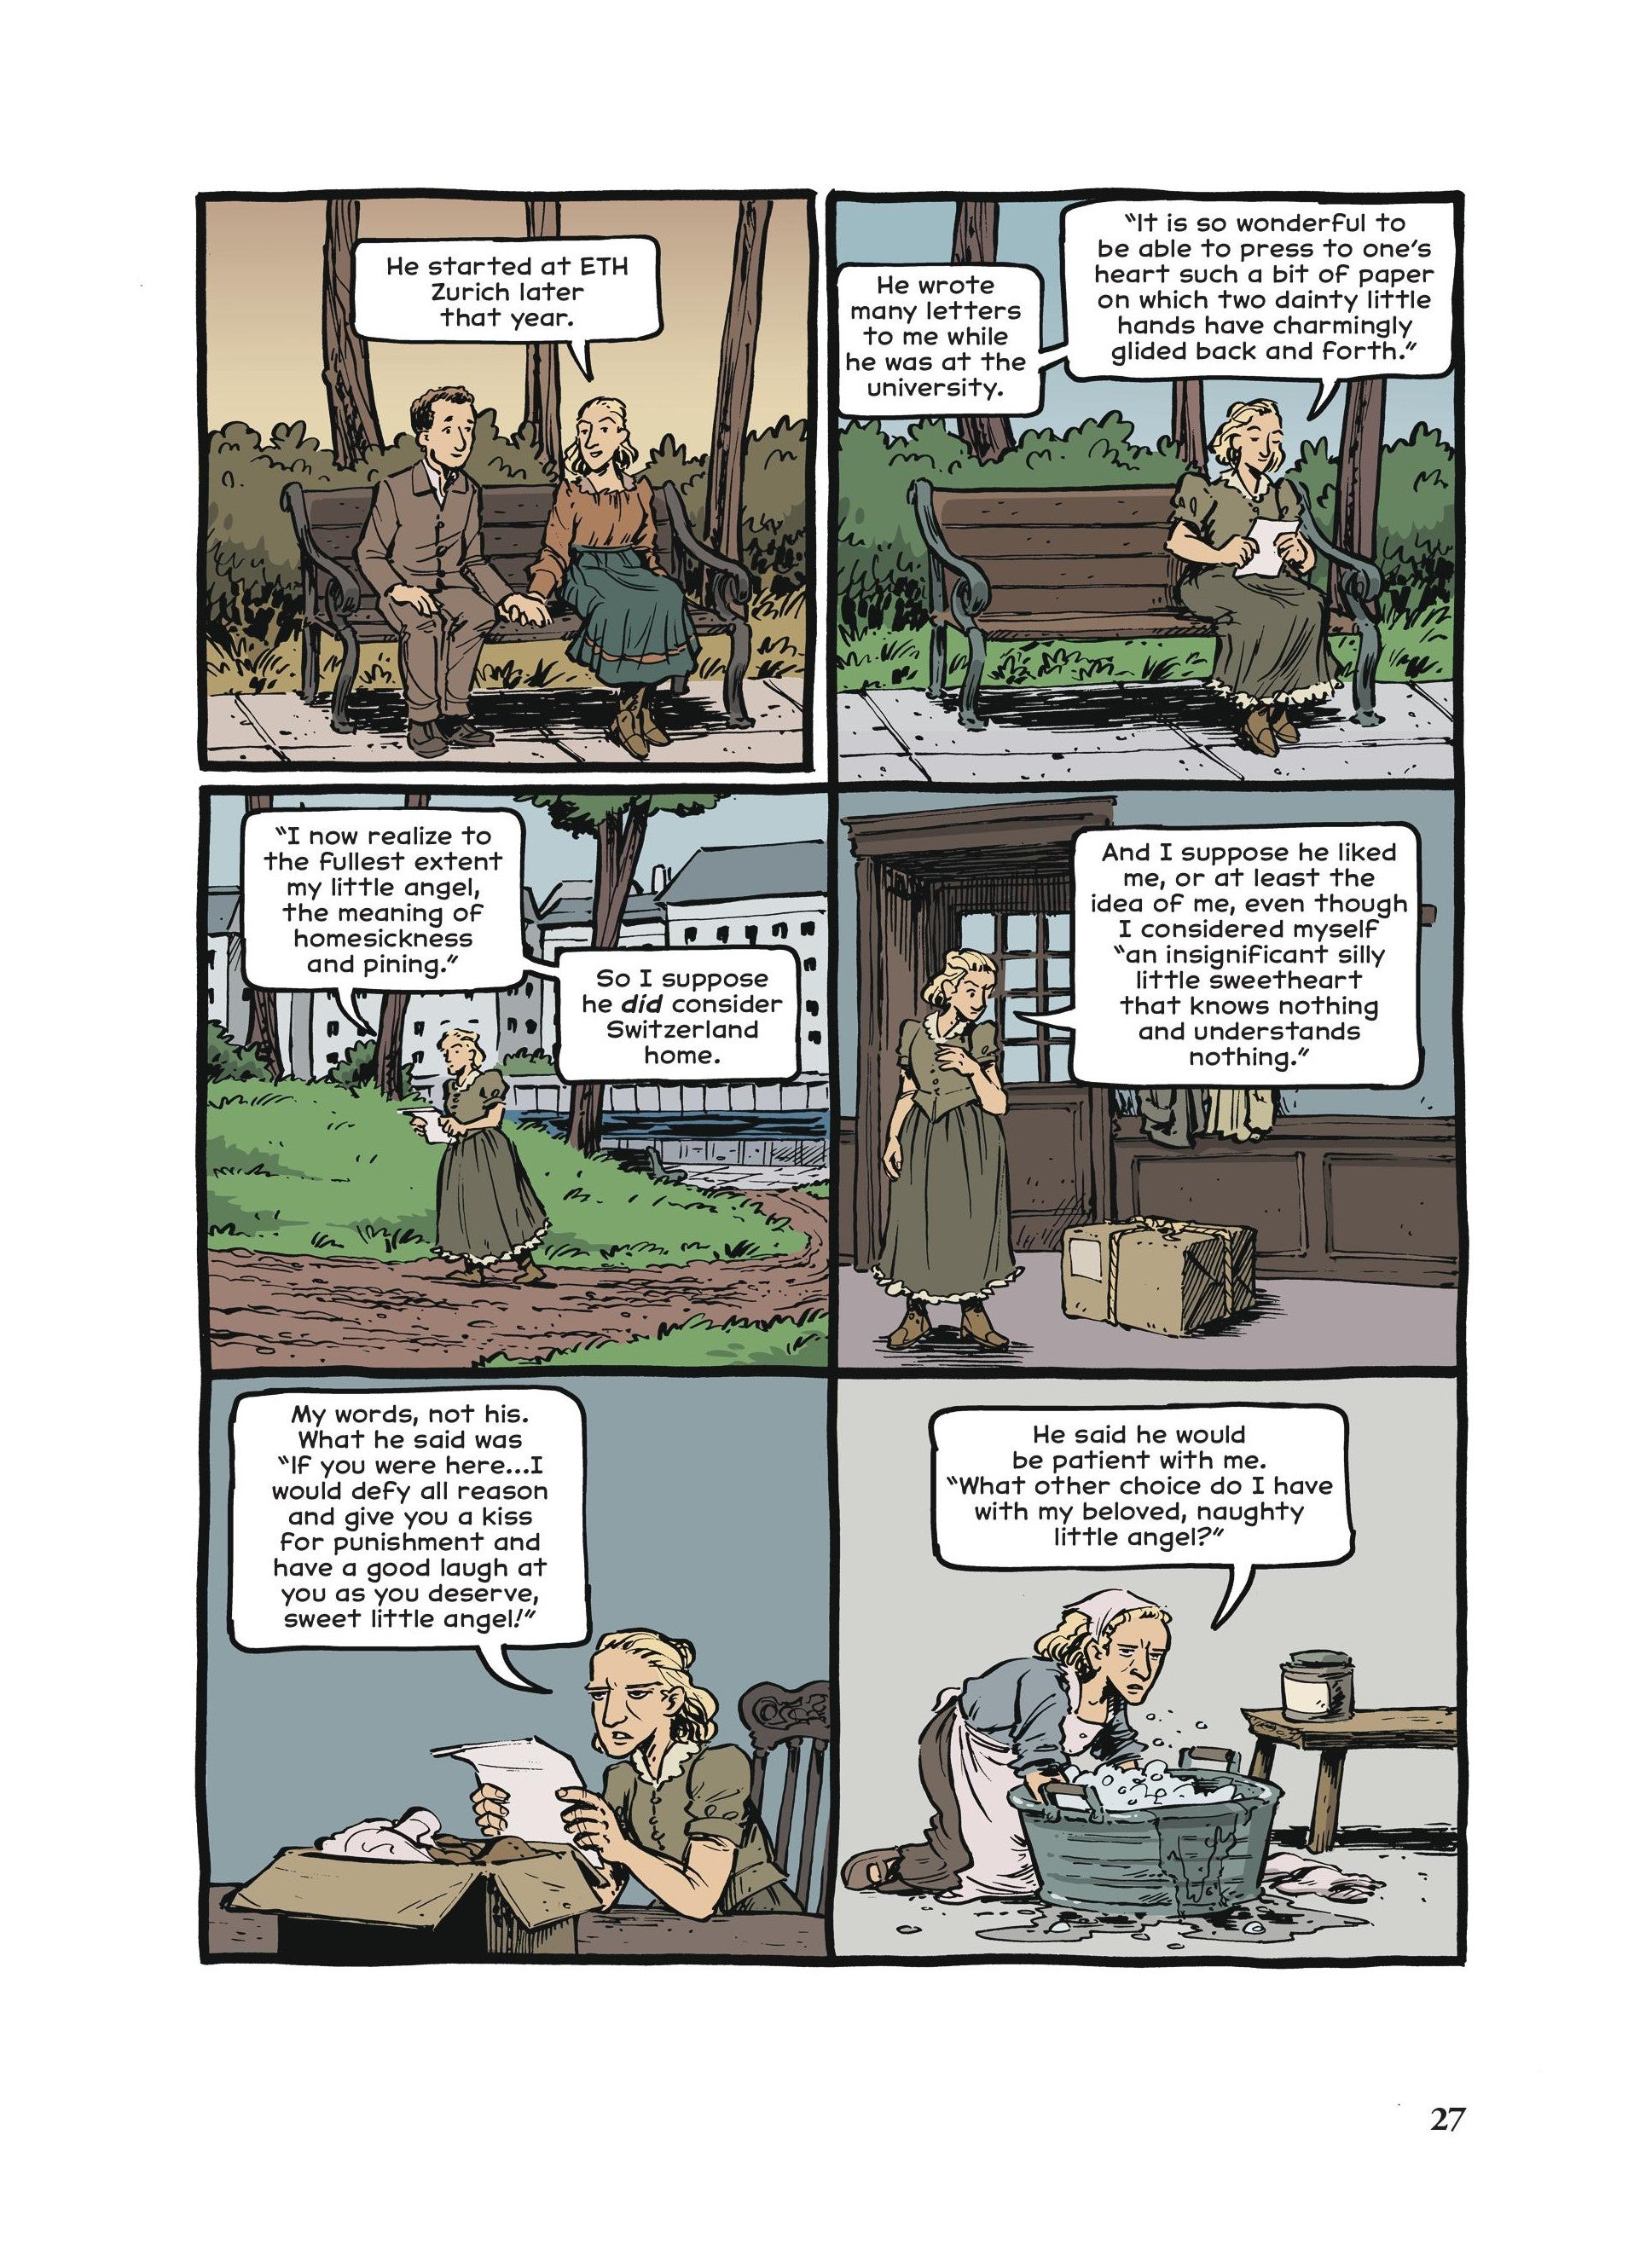 Interior comics page featuring Maria Winteler speaking to Einstein and then to the audience, reading his letters